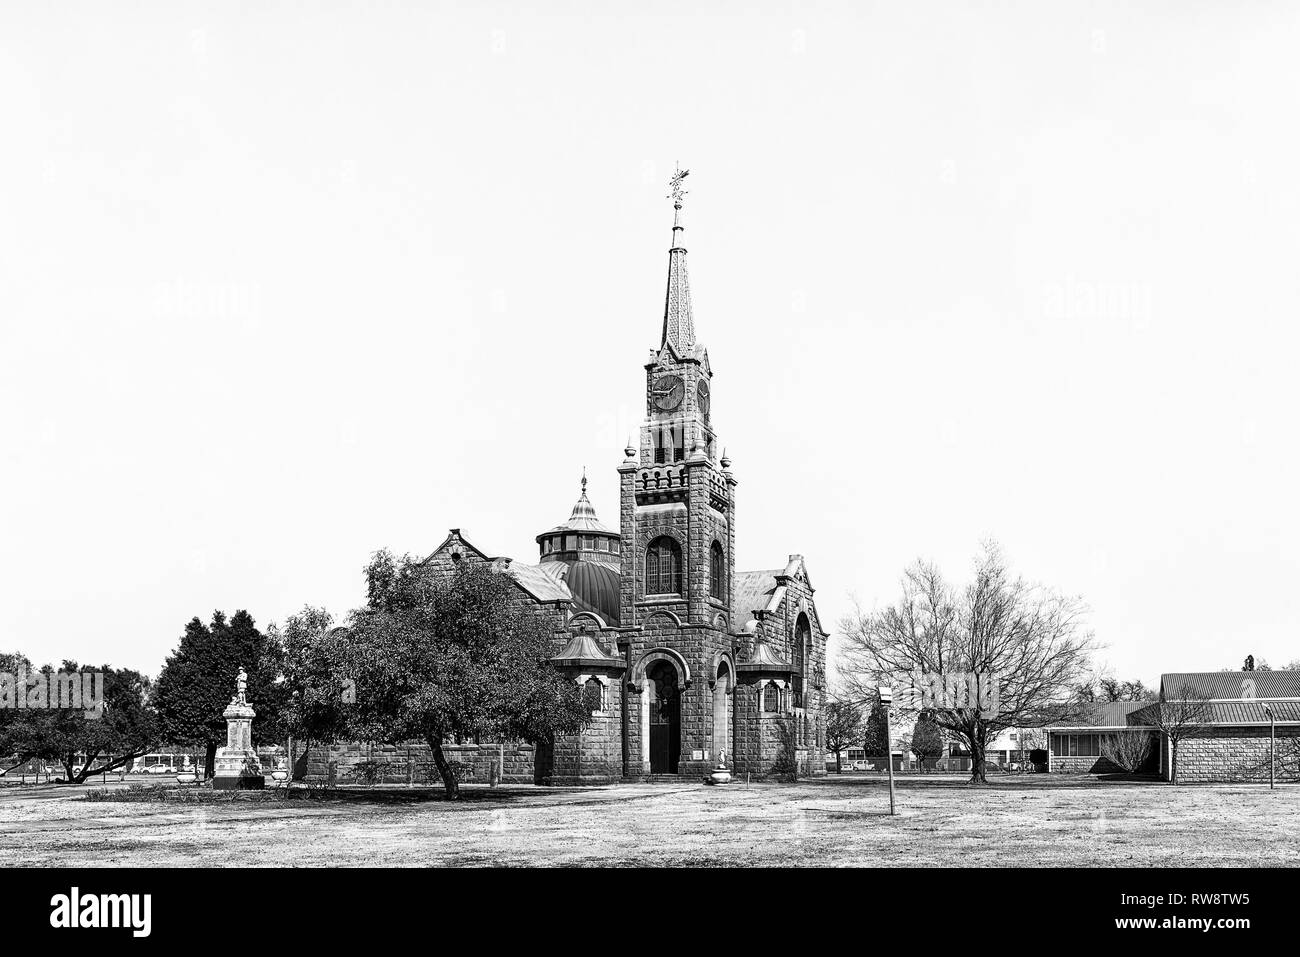 KROONSTAD. SOUTH AFRICA, JULY 30, 2018: The Dutch Reformed Mother Church in Kroonstad, a town in the Free State Province of South Africa. Monochrome Stock Photo